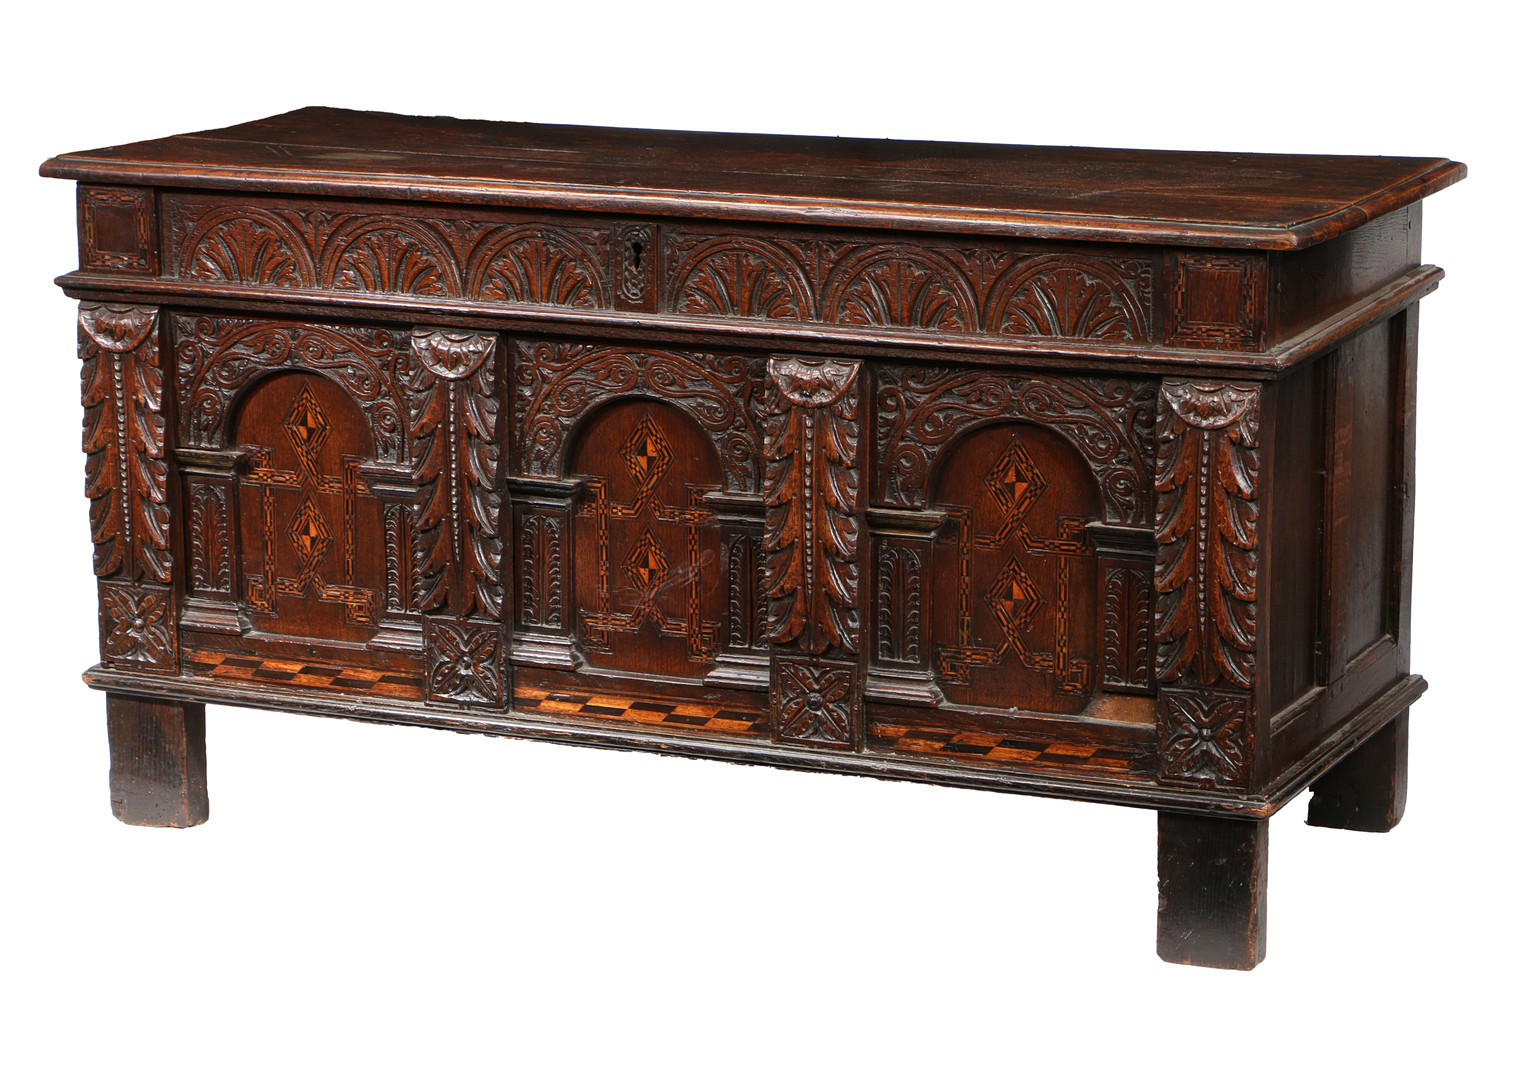 A JAMES I OAK AND PARQUETRY INLAID COFFER, WEST COUNTRY, CIRCA 1610.